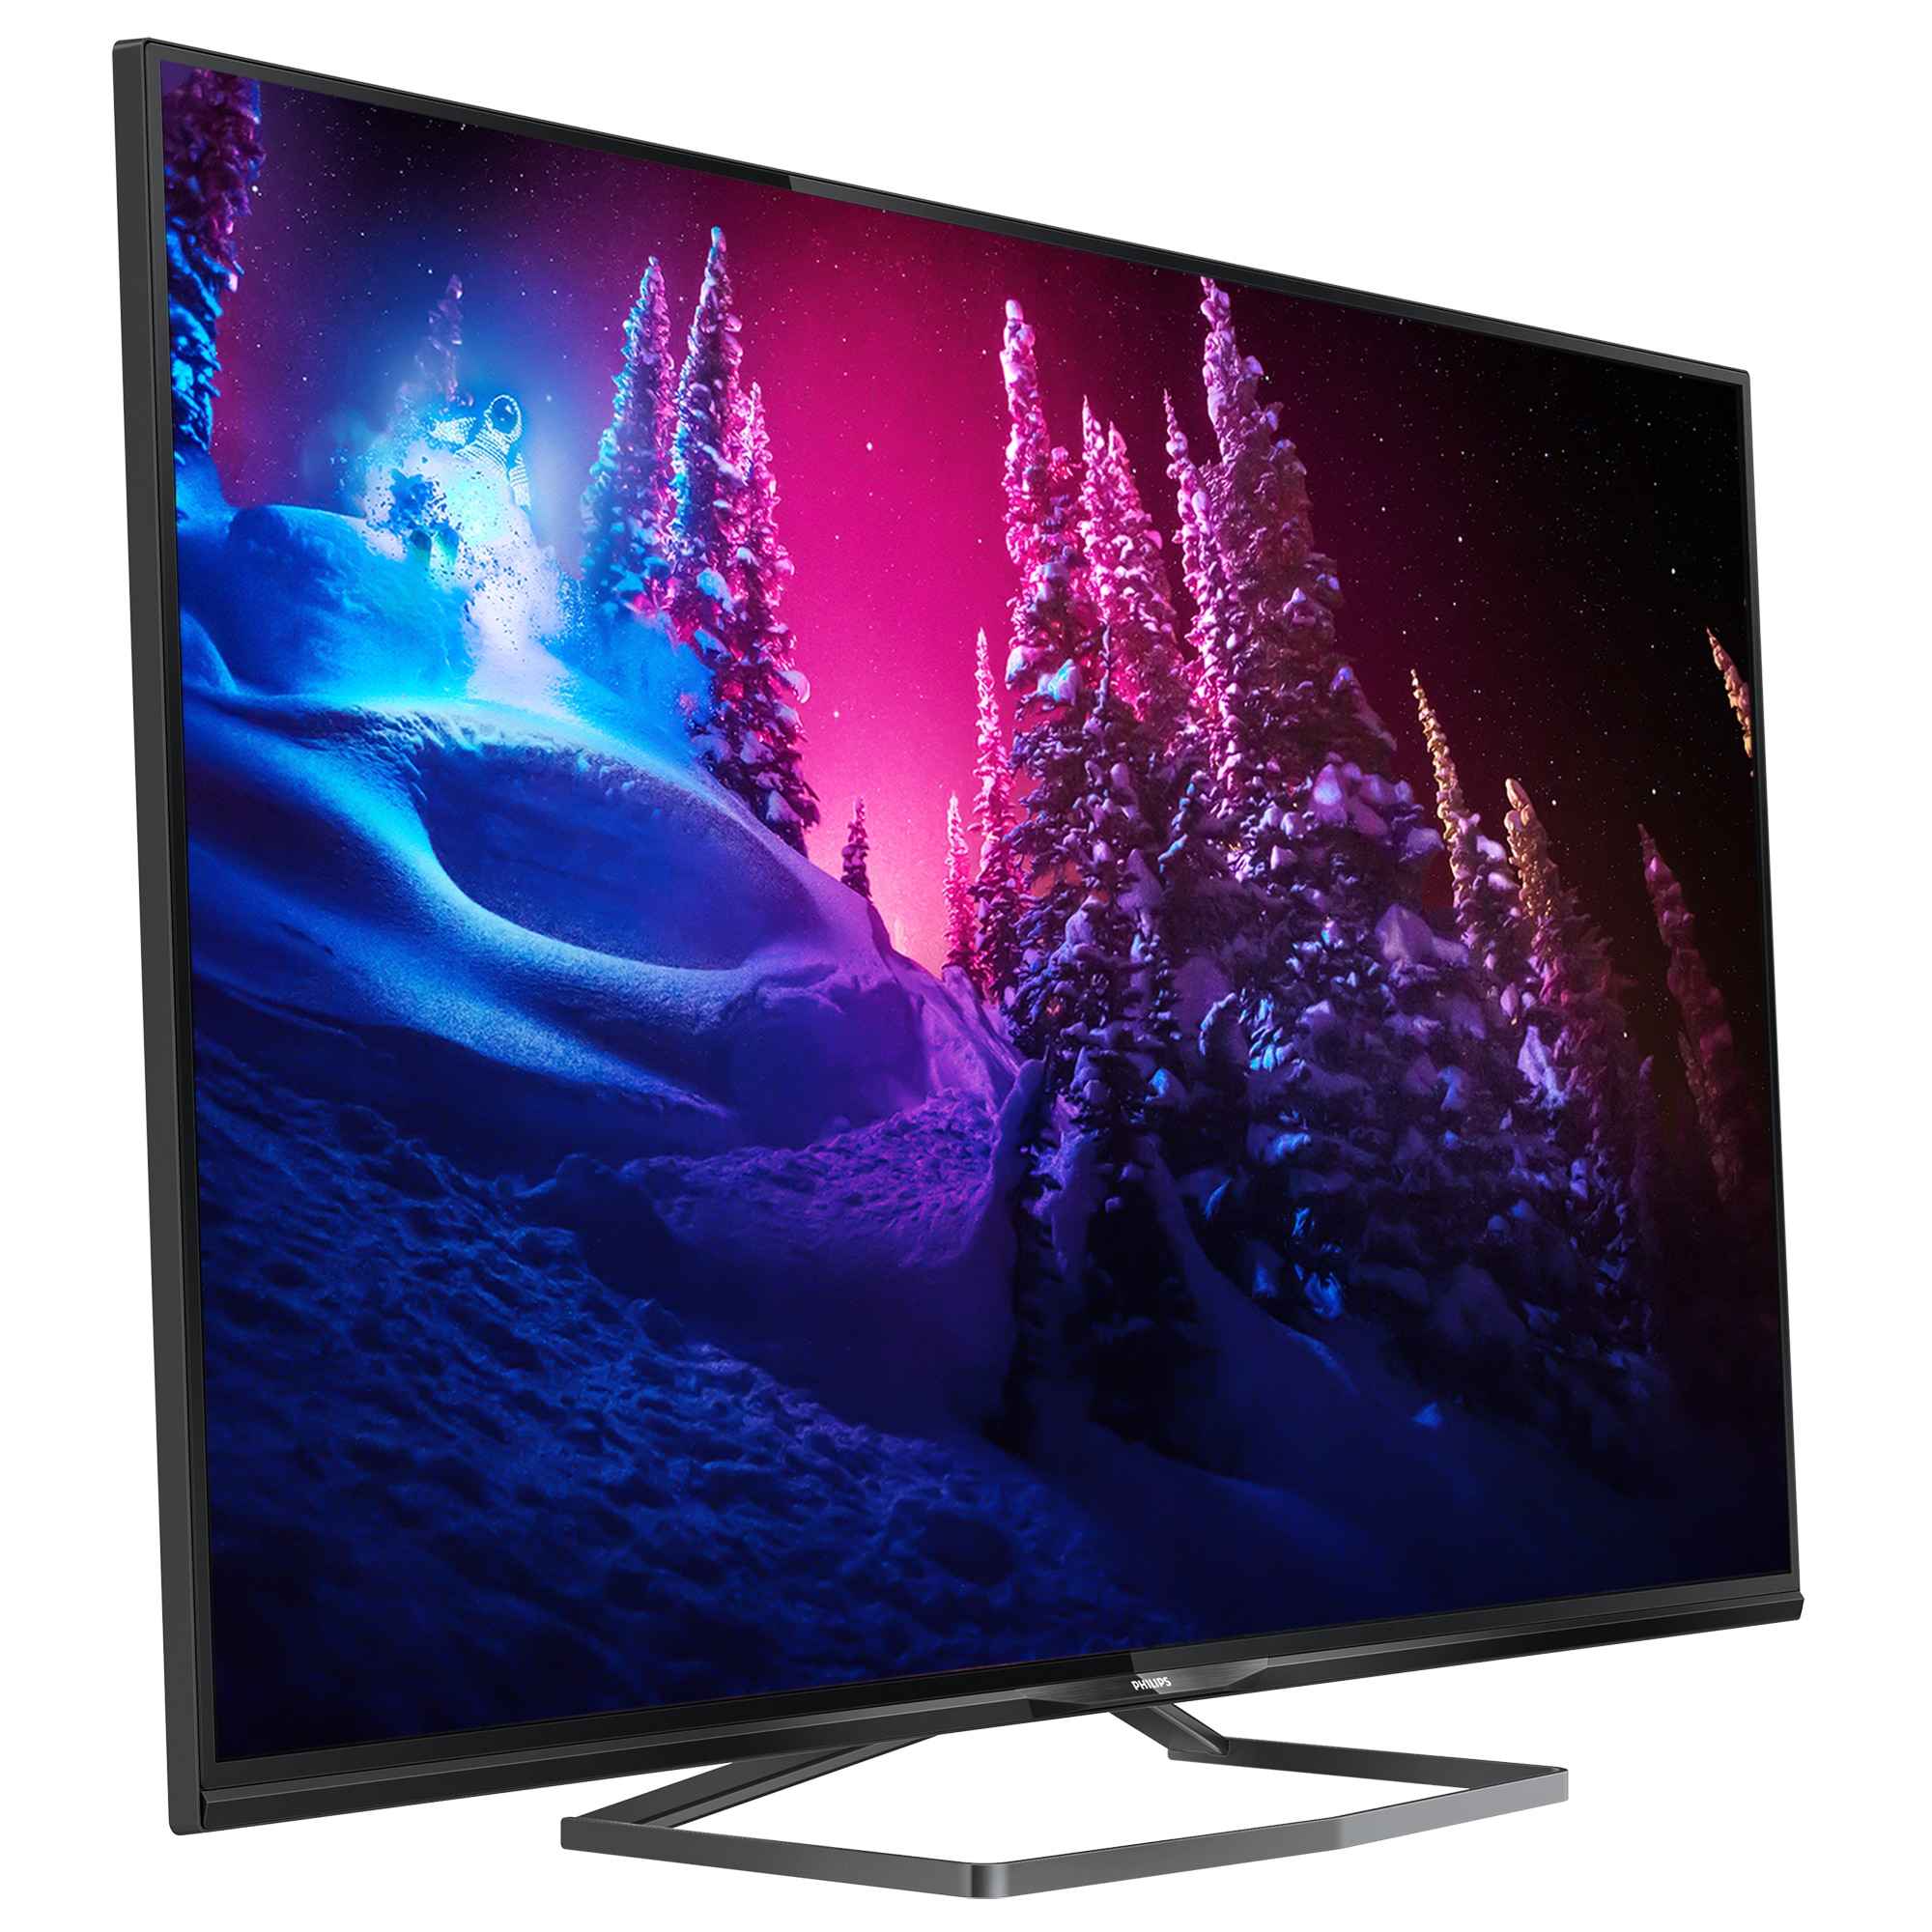 nobody Contain Obsession Televizor LED Smart TV 3D Philips, 147 cm, 58PUS6809, 4K Ultra HD, Clasa A+  - eMAG.ro